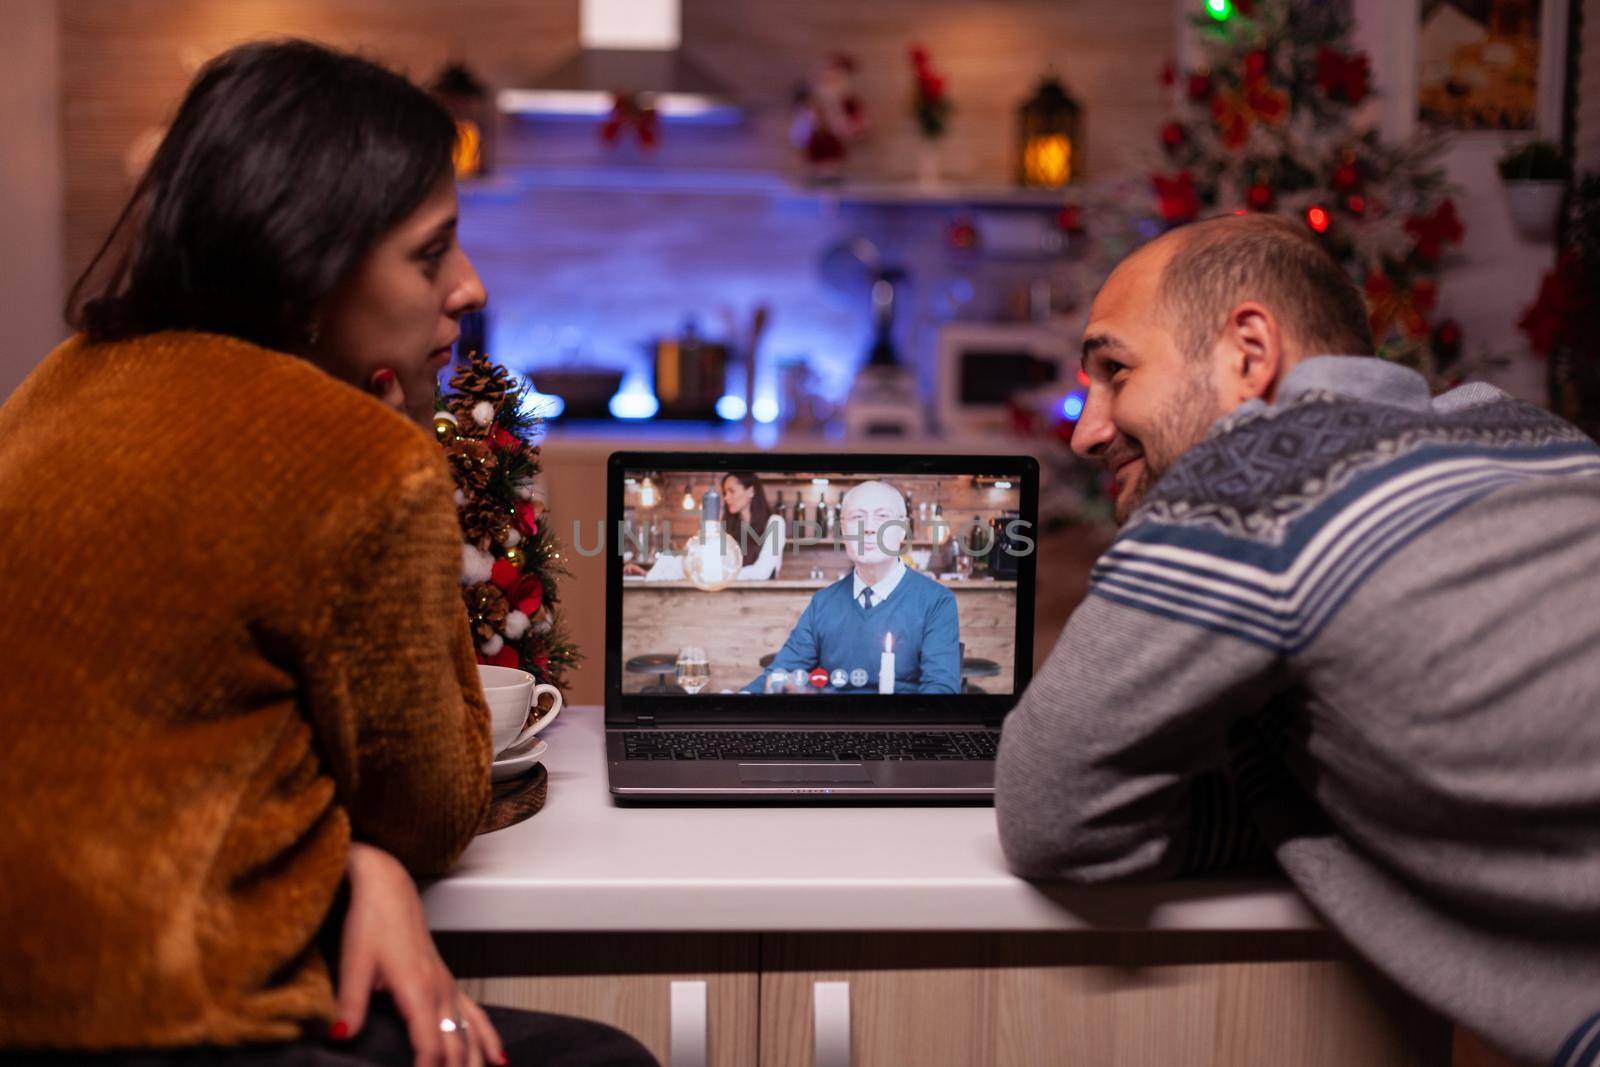 Happy family discussing with remote grandparent during online videocall conference celebrating christmas holiday together in xmas decorated kitchen. Joyful couple enjoying winter season